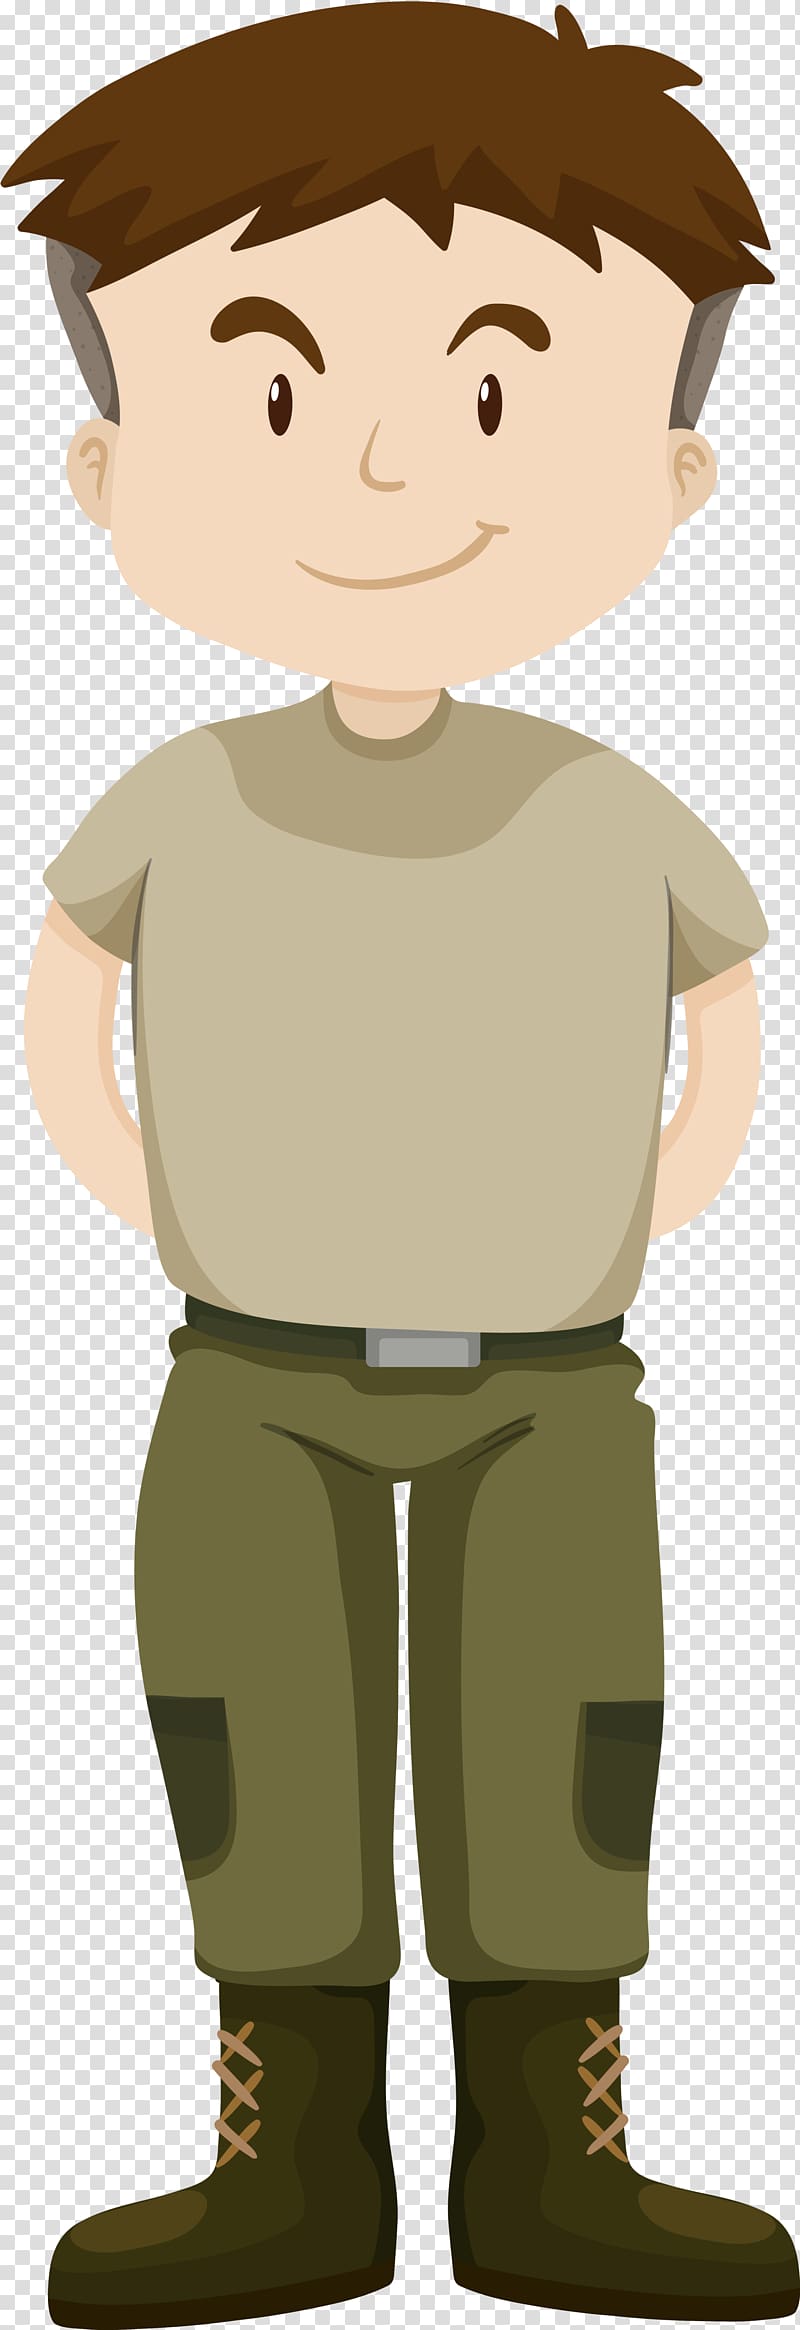 Soldier Cartoon, Green cartoon soldiers transparent background PNG clipart